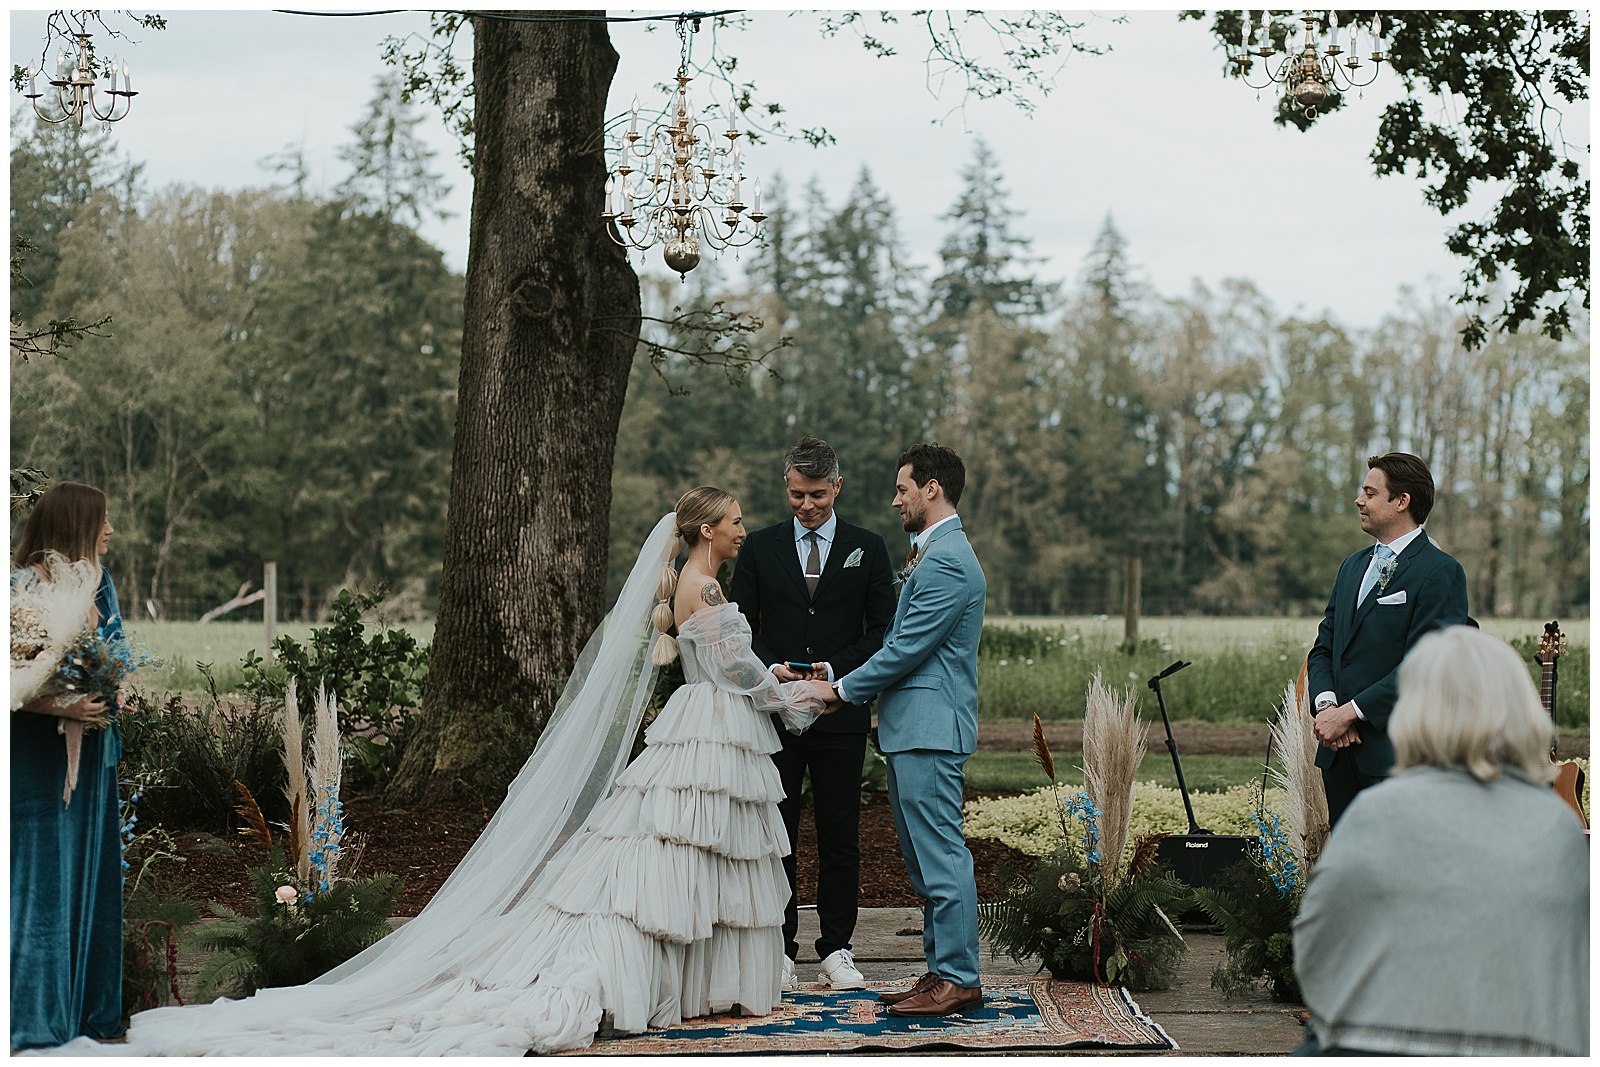 A couple gets married under trees at a wedding on Oregon coast